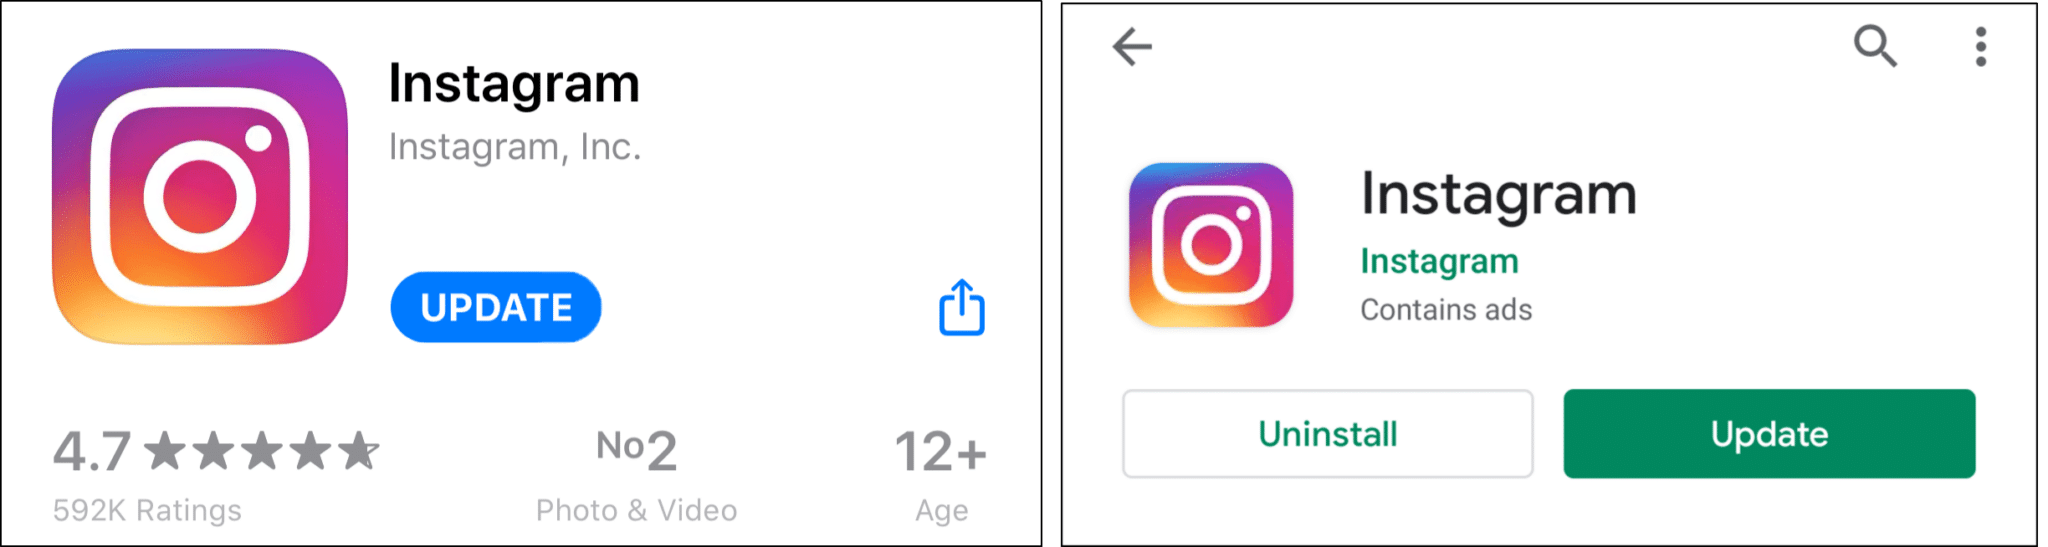 Update Instagram app to fix profile picture not showing or changing